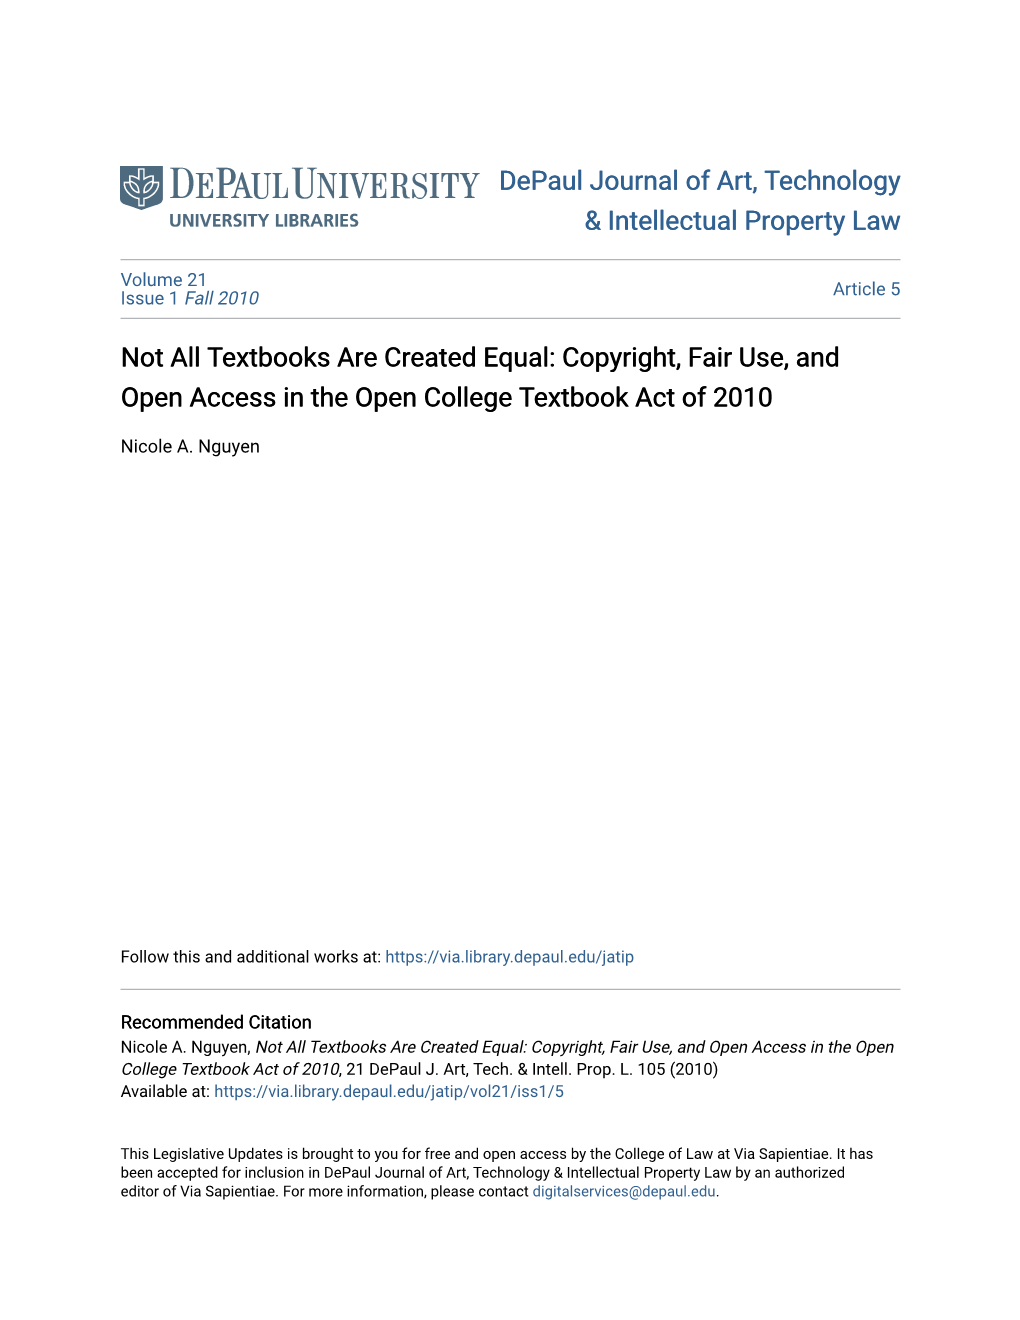 Not All Textbooks Are Created Equal: Copyright, Fair Use, and Open Access in the Open College Textbook Act of 2010